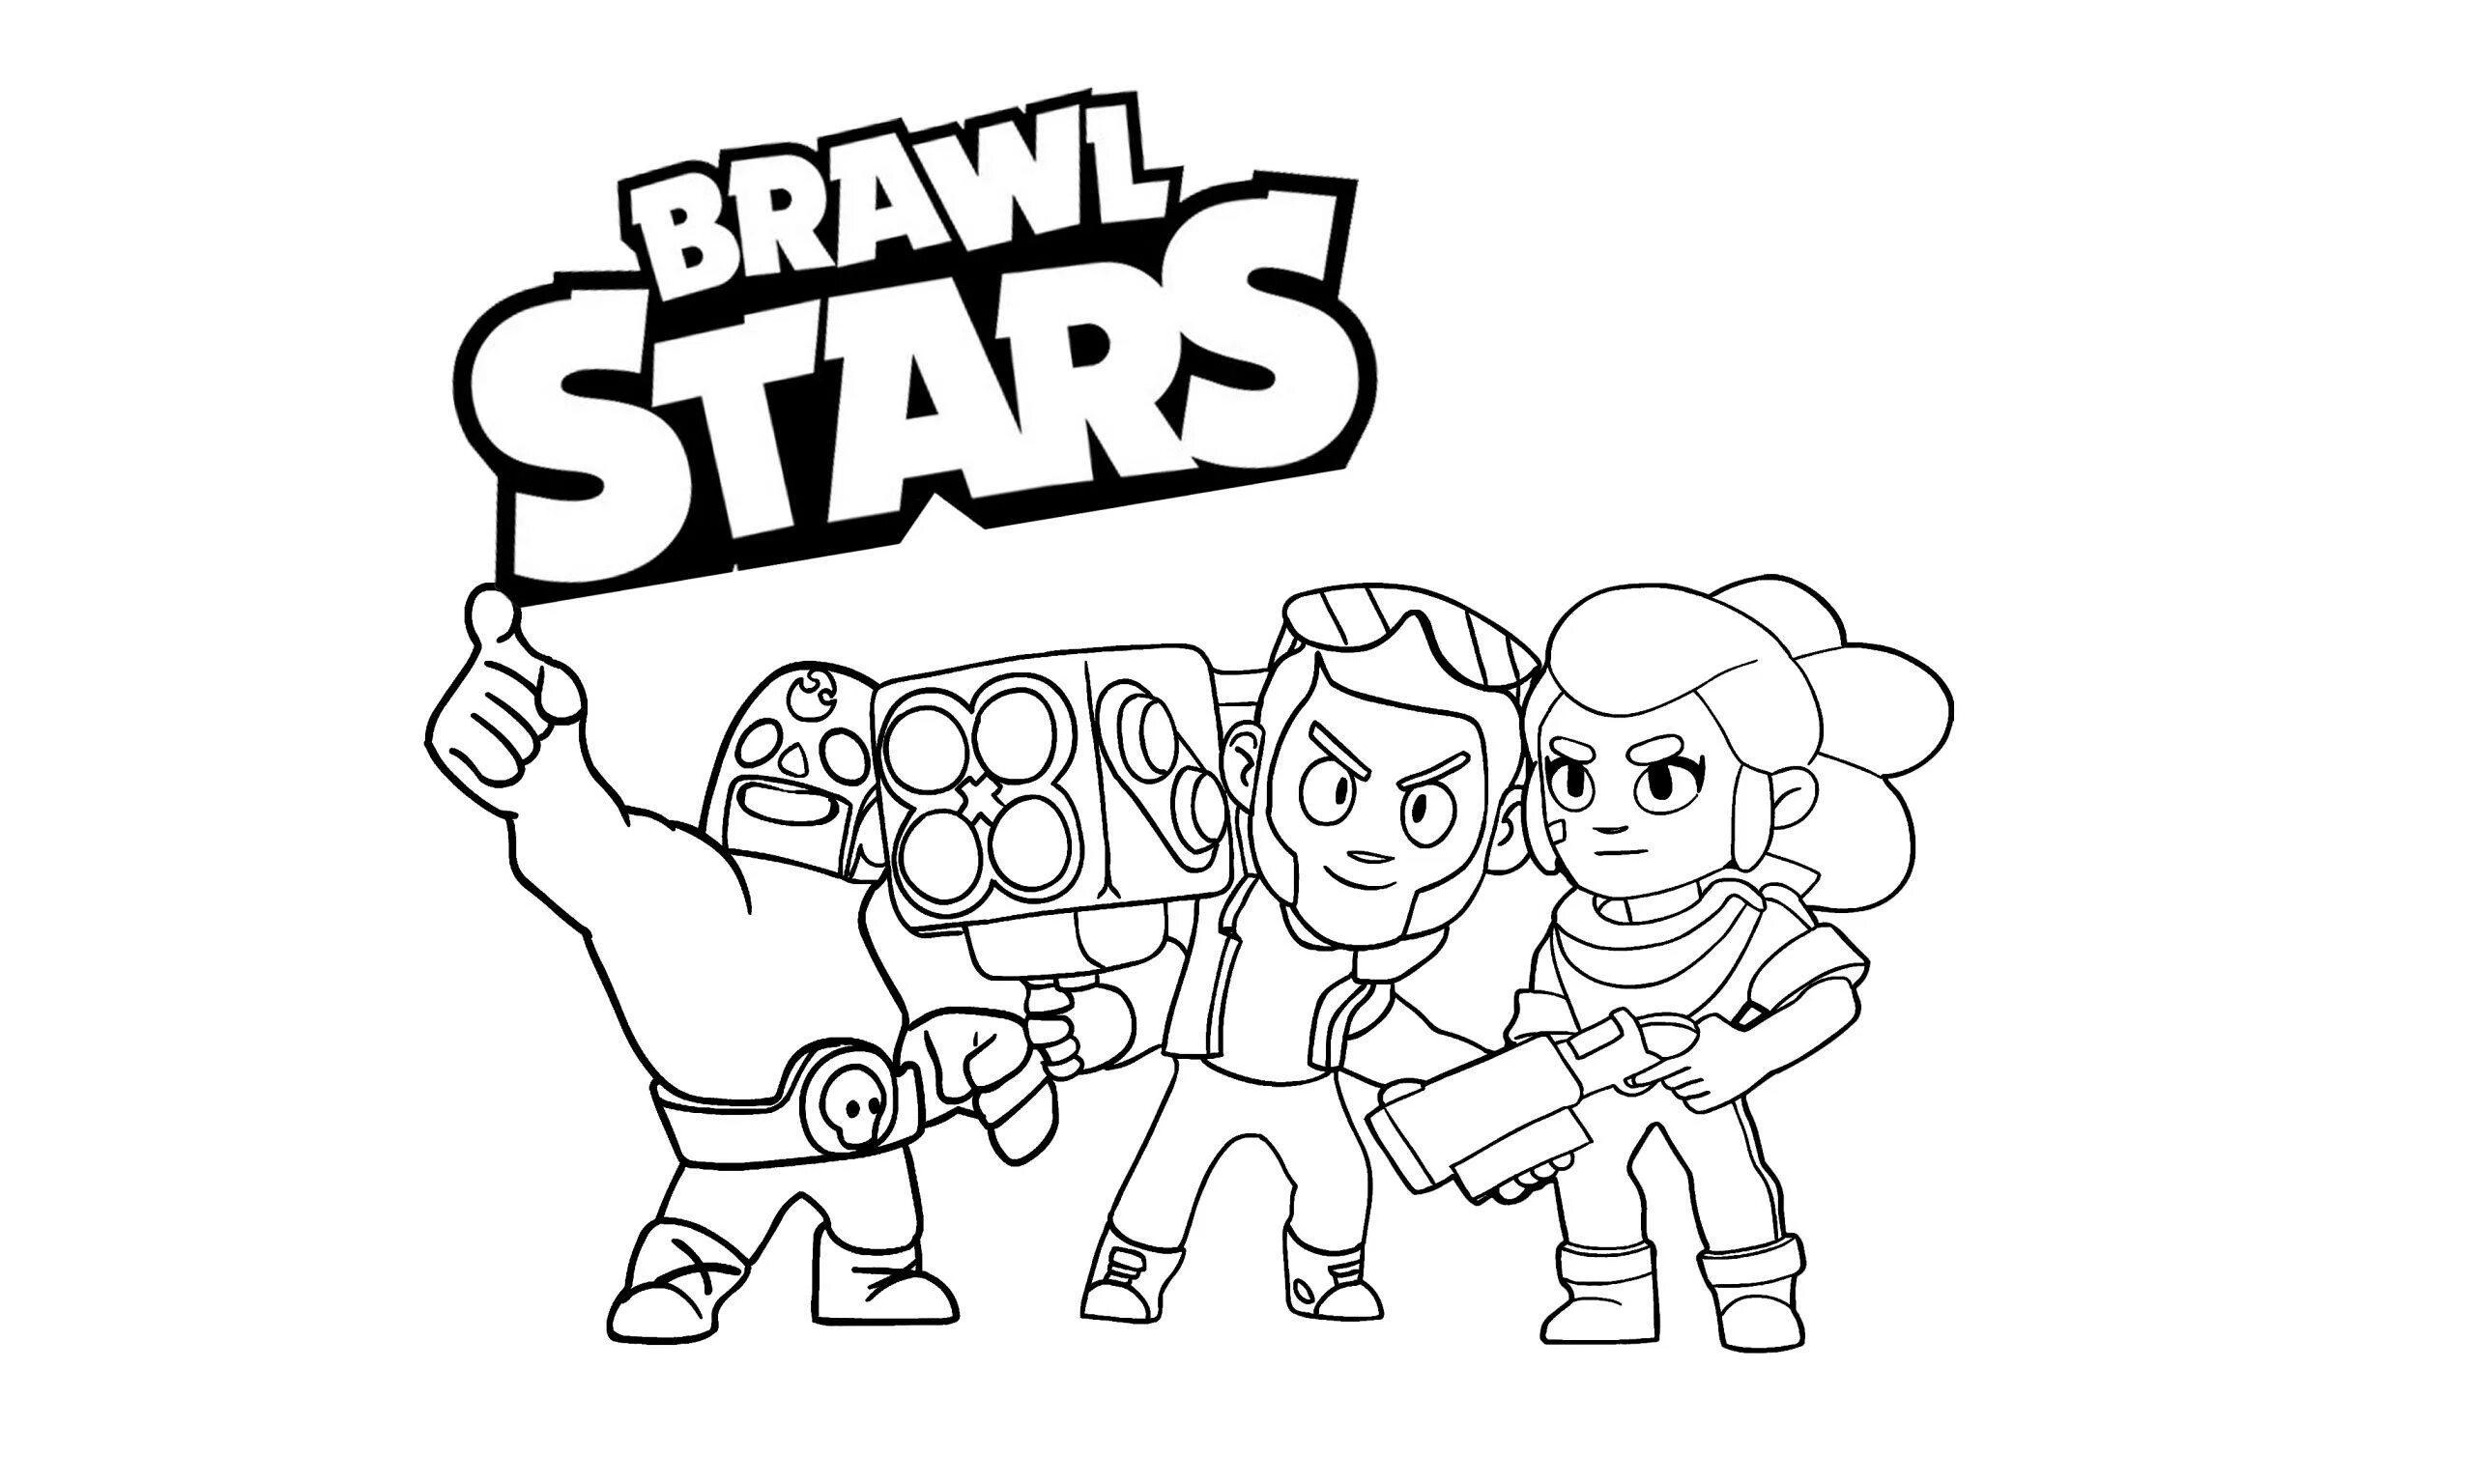 Brown stars for kids #25